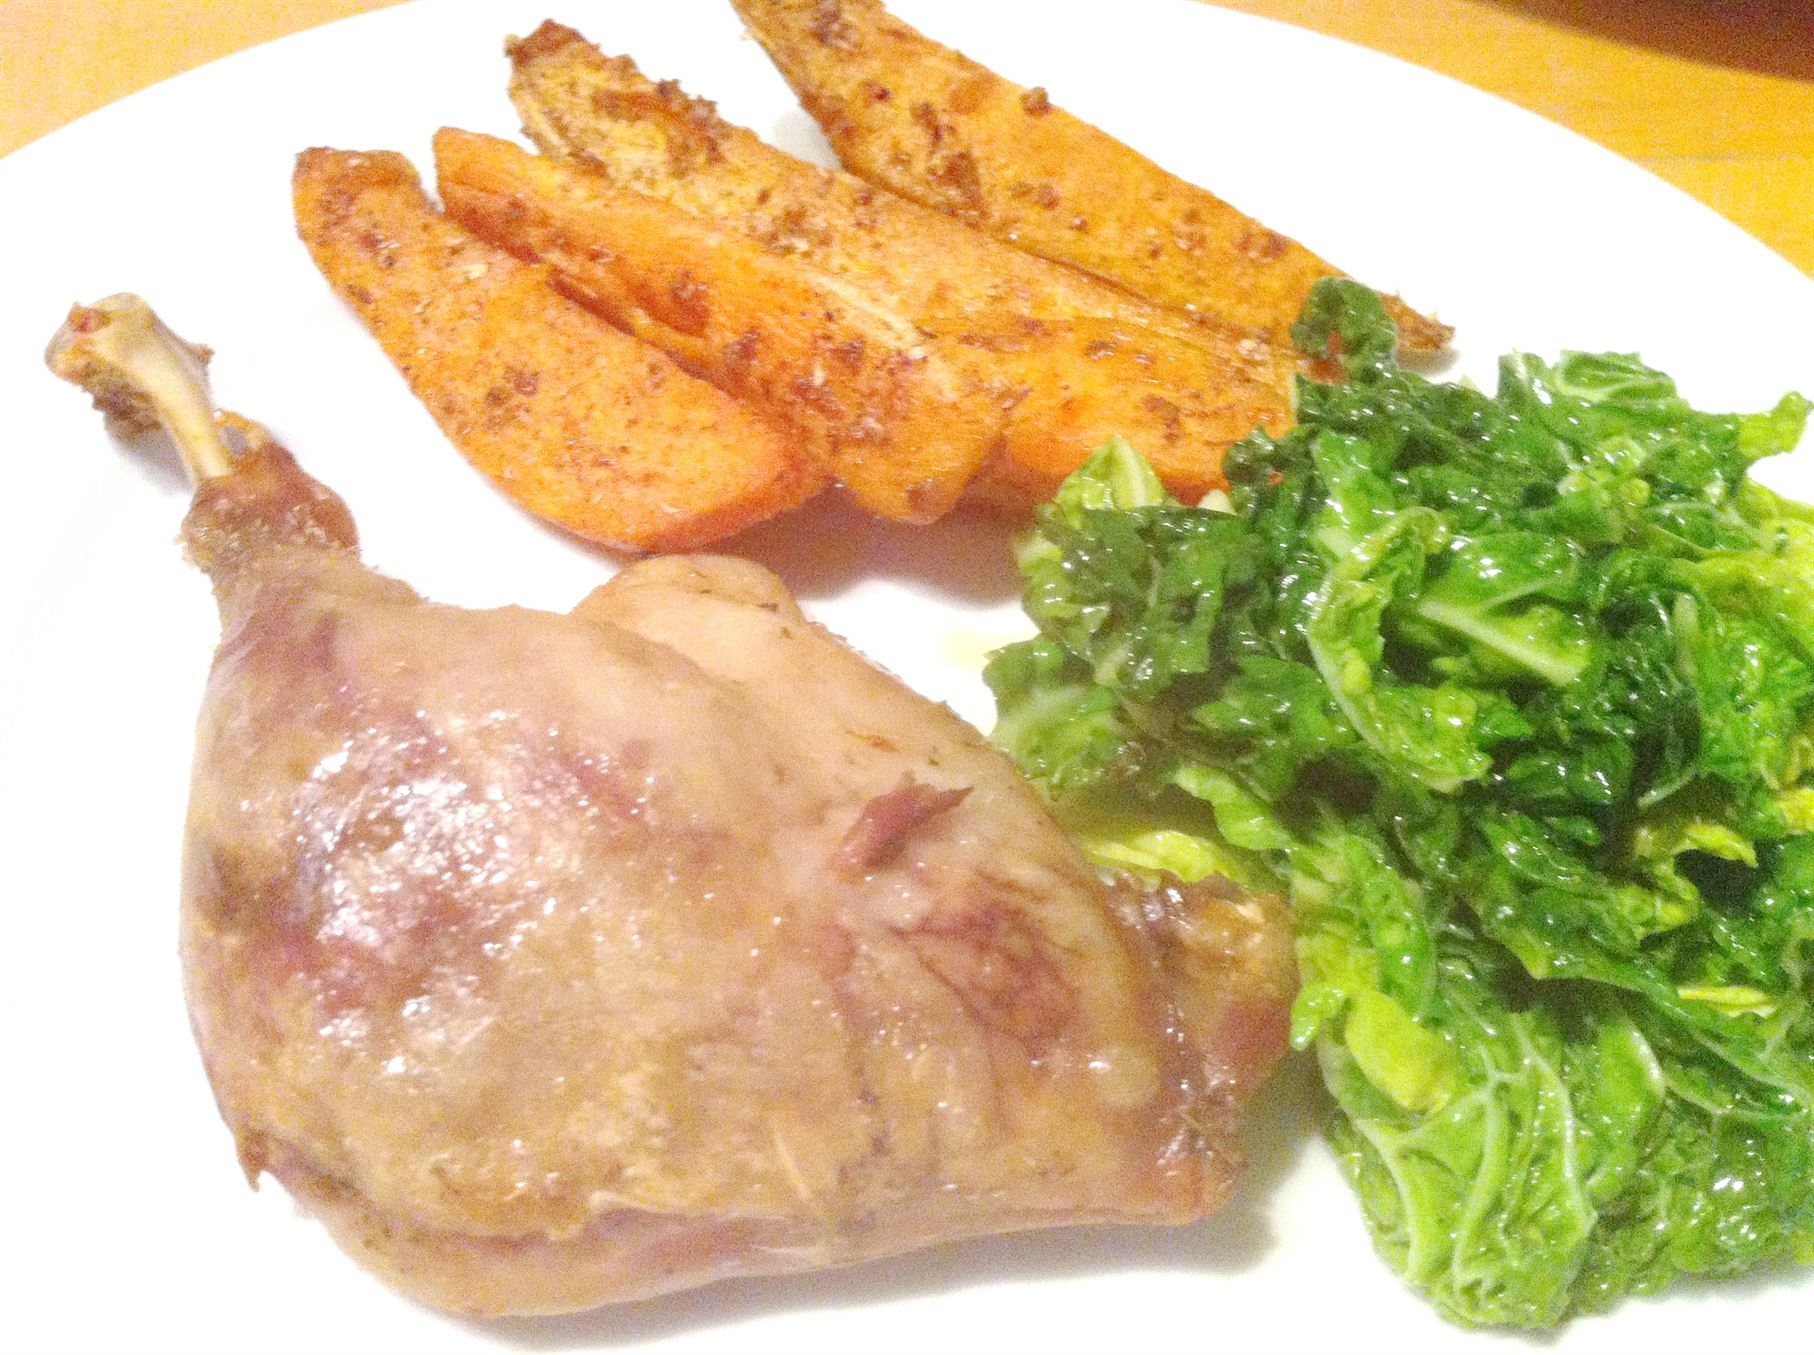 Confit duck legs with spiced sweet potato wedges, Lay The Table